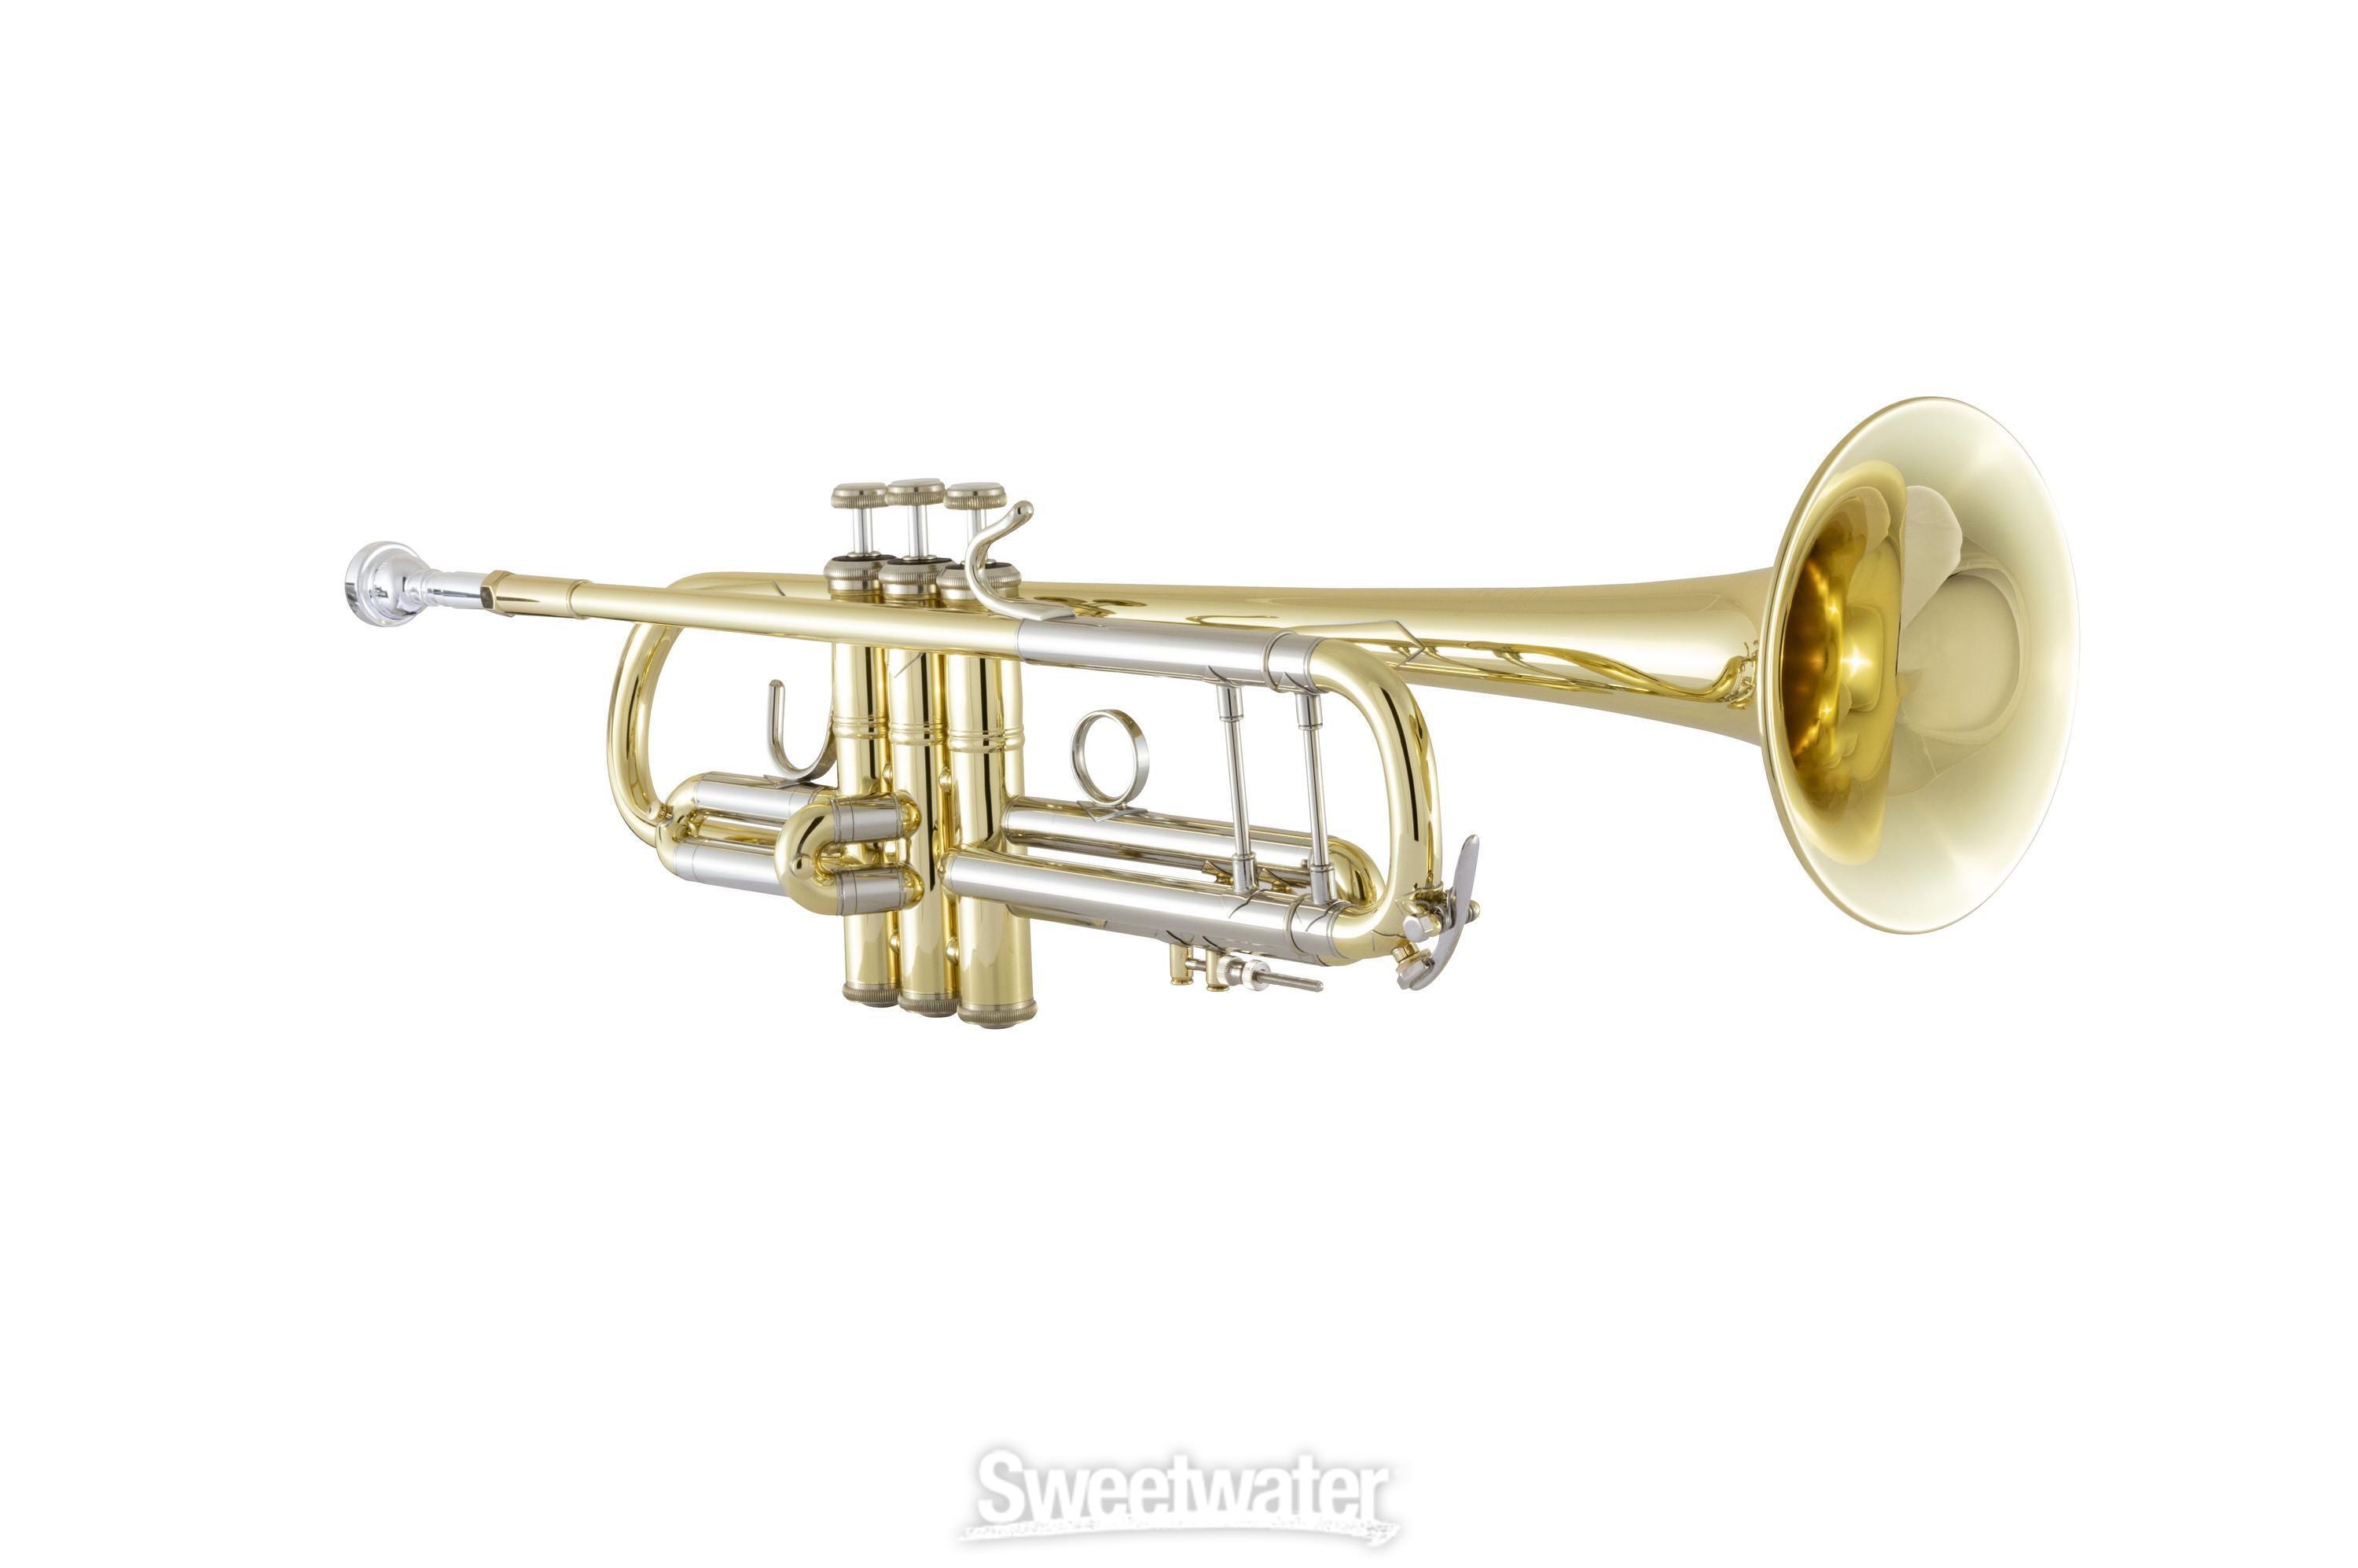 STAGG LV-TR5204 Bb trumpet, ML-bore, leadpipe in gold brass, with soft  case